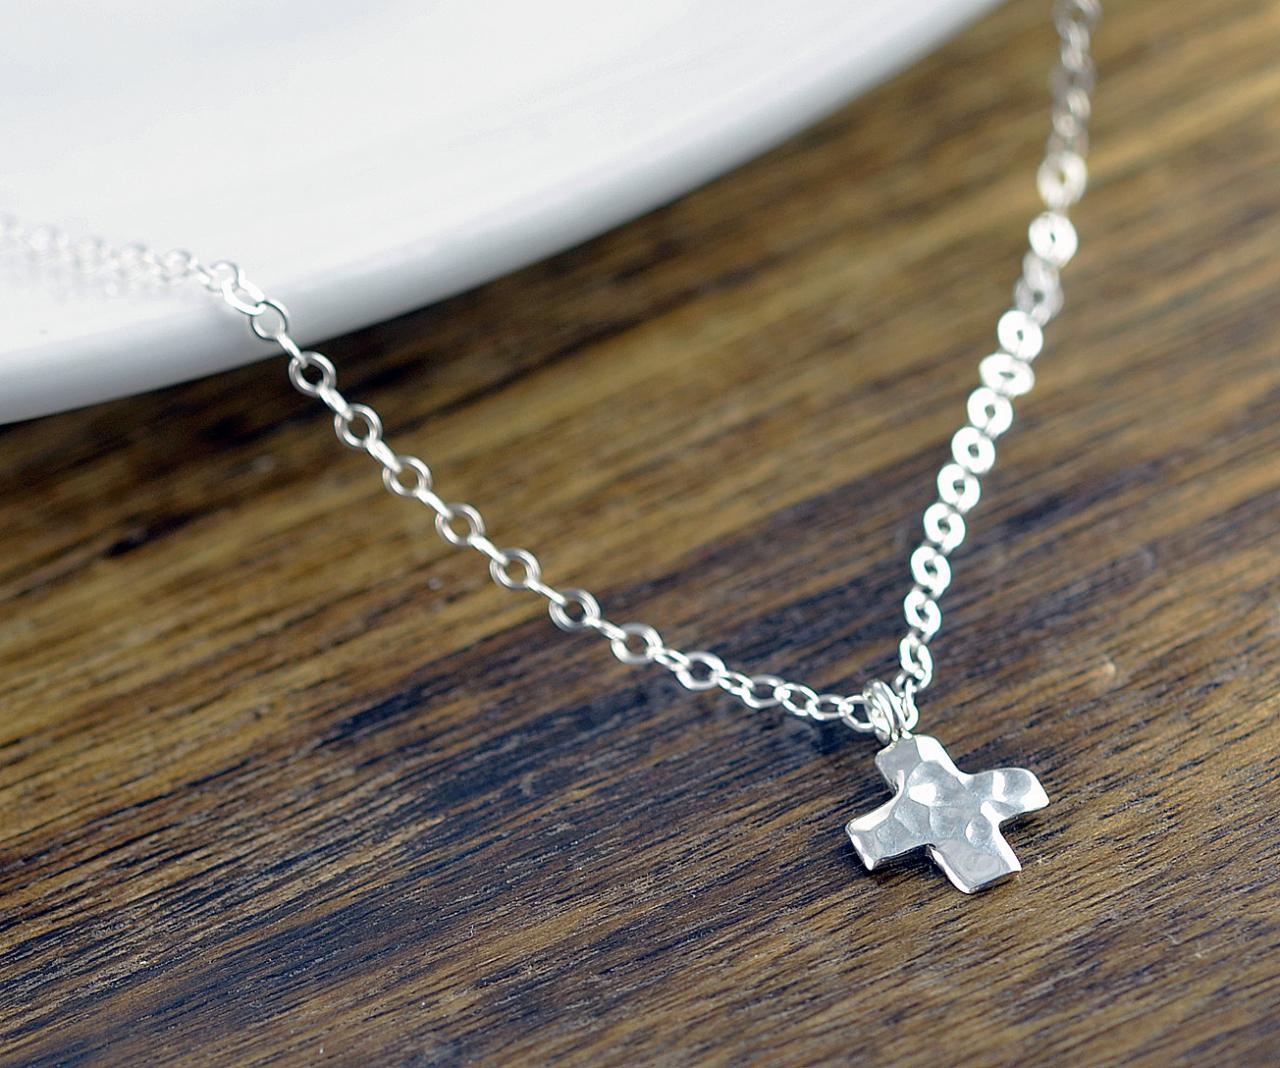 Silver Cross Necklace - Cross Necklace - Tiny Cross Necklace - Everyday Necklace - Gift For Her - Delicate Necklace - Layering Necklace